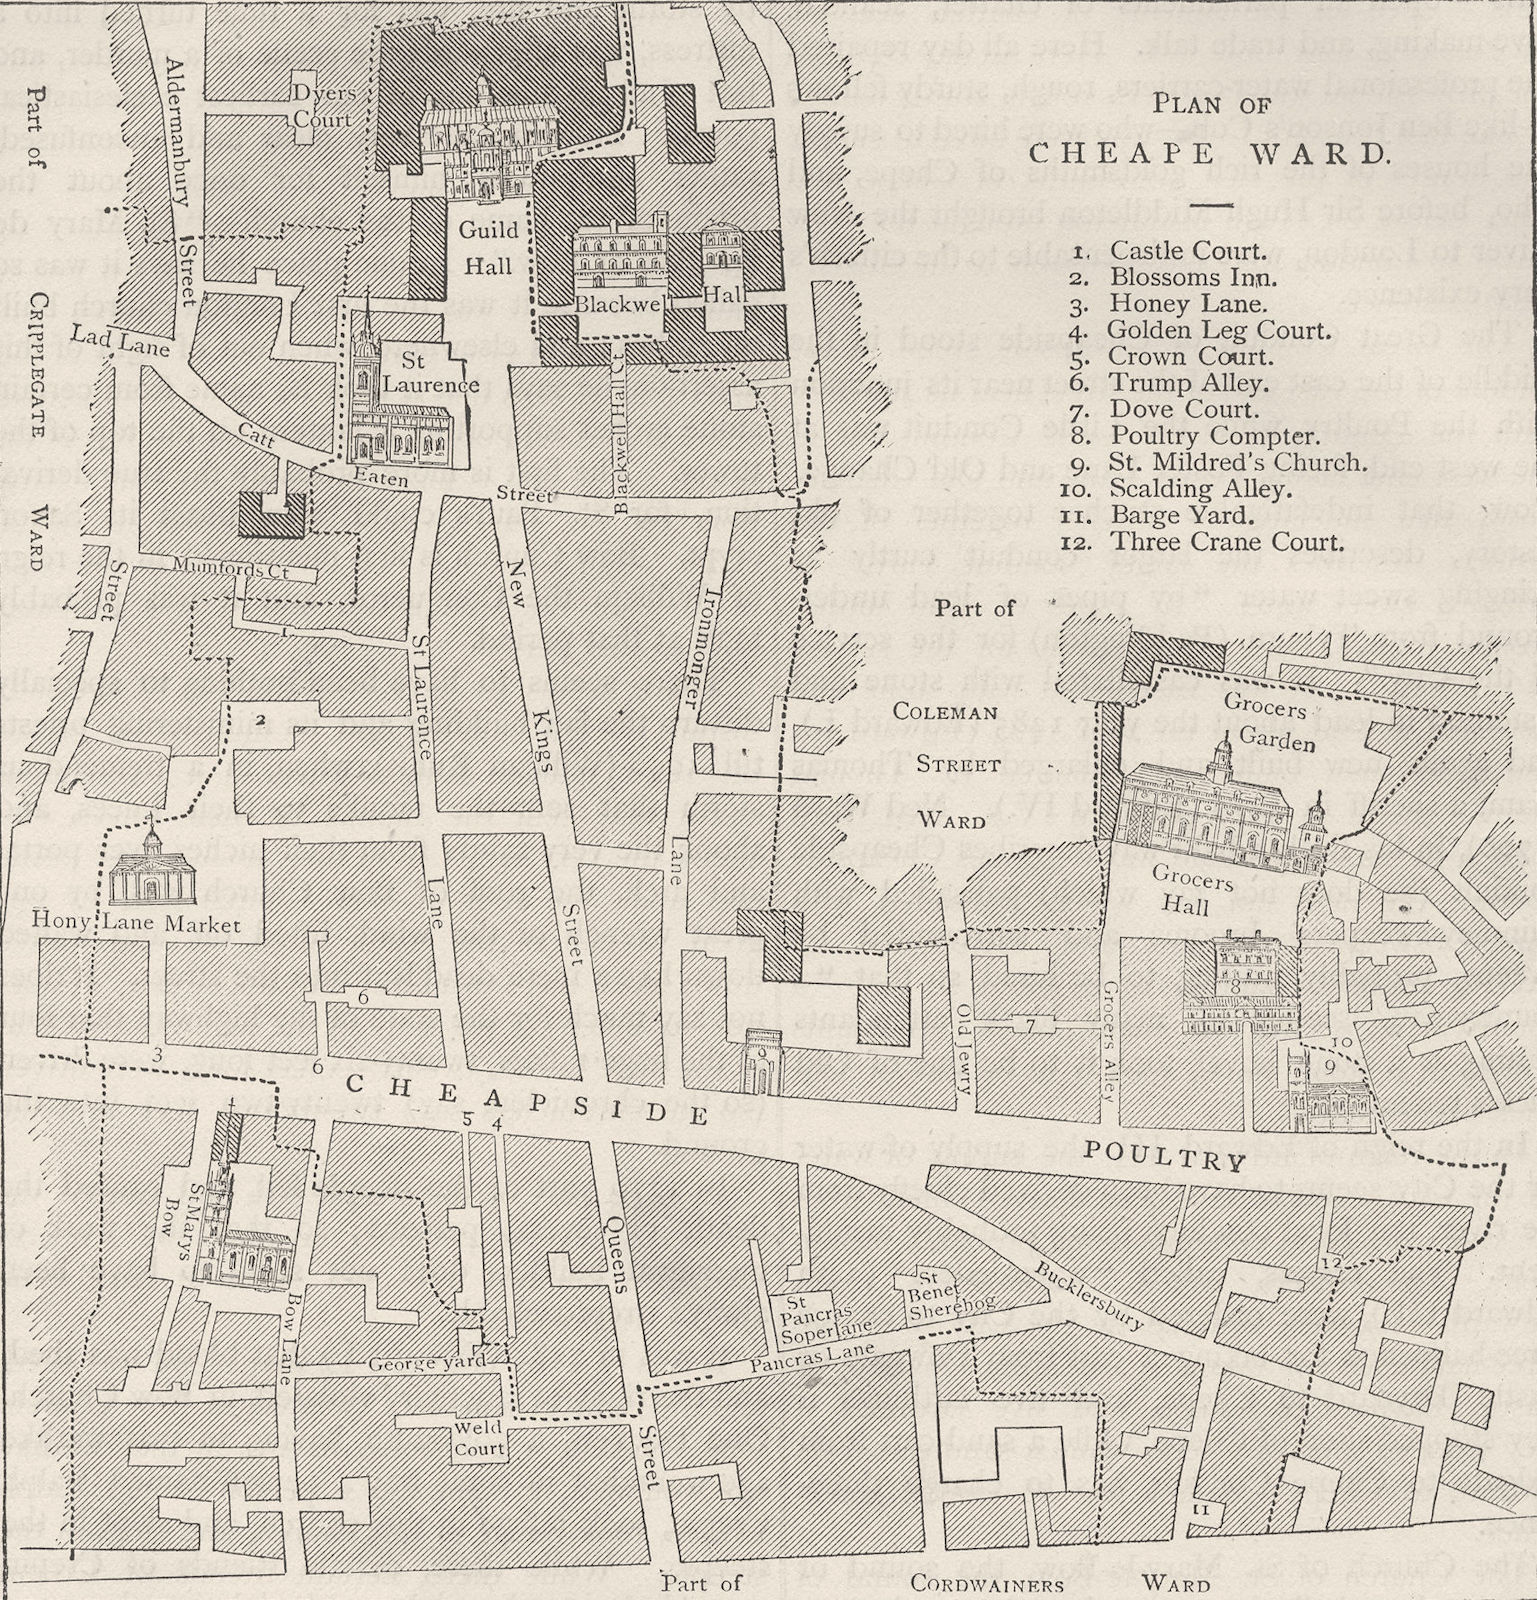 CHEAPSIDE. Old map of the Ward of Cheap, about 1750. London c1880